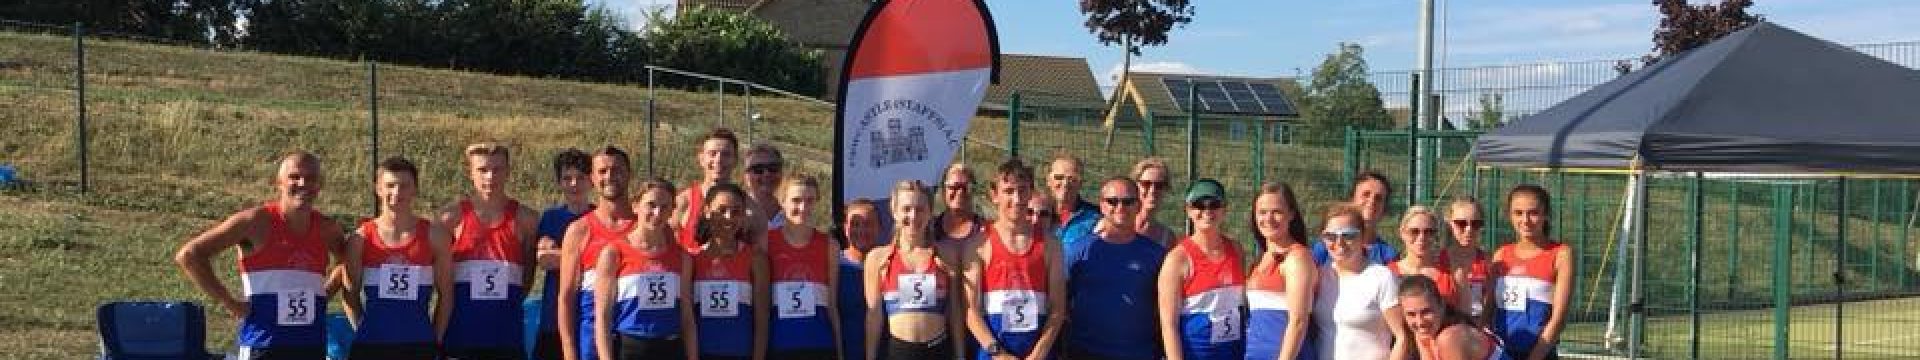 Midlands Road Relay Championships – 23/9/17